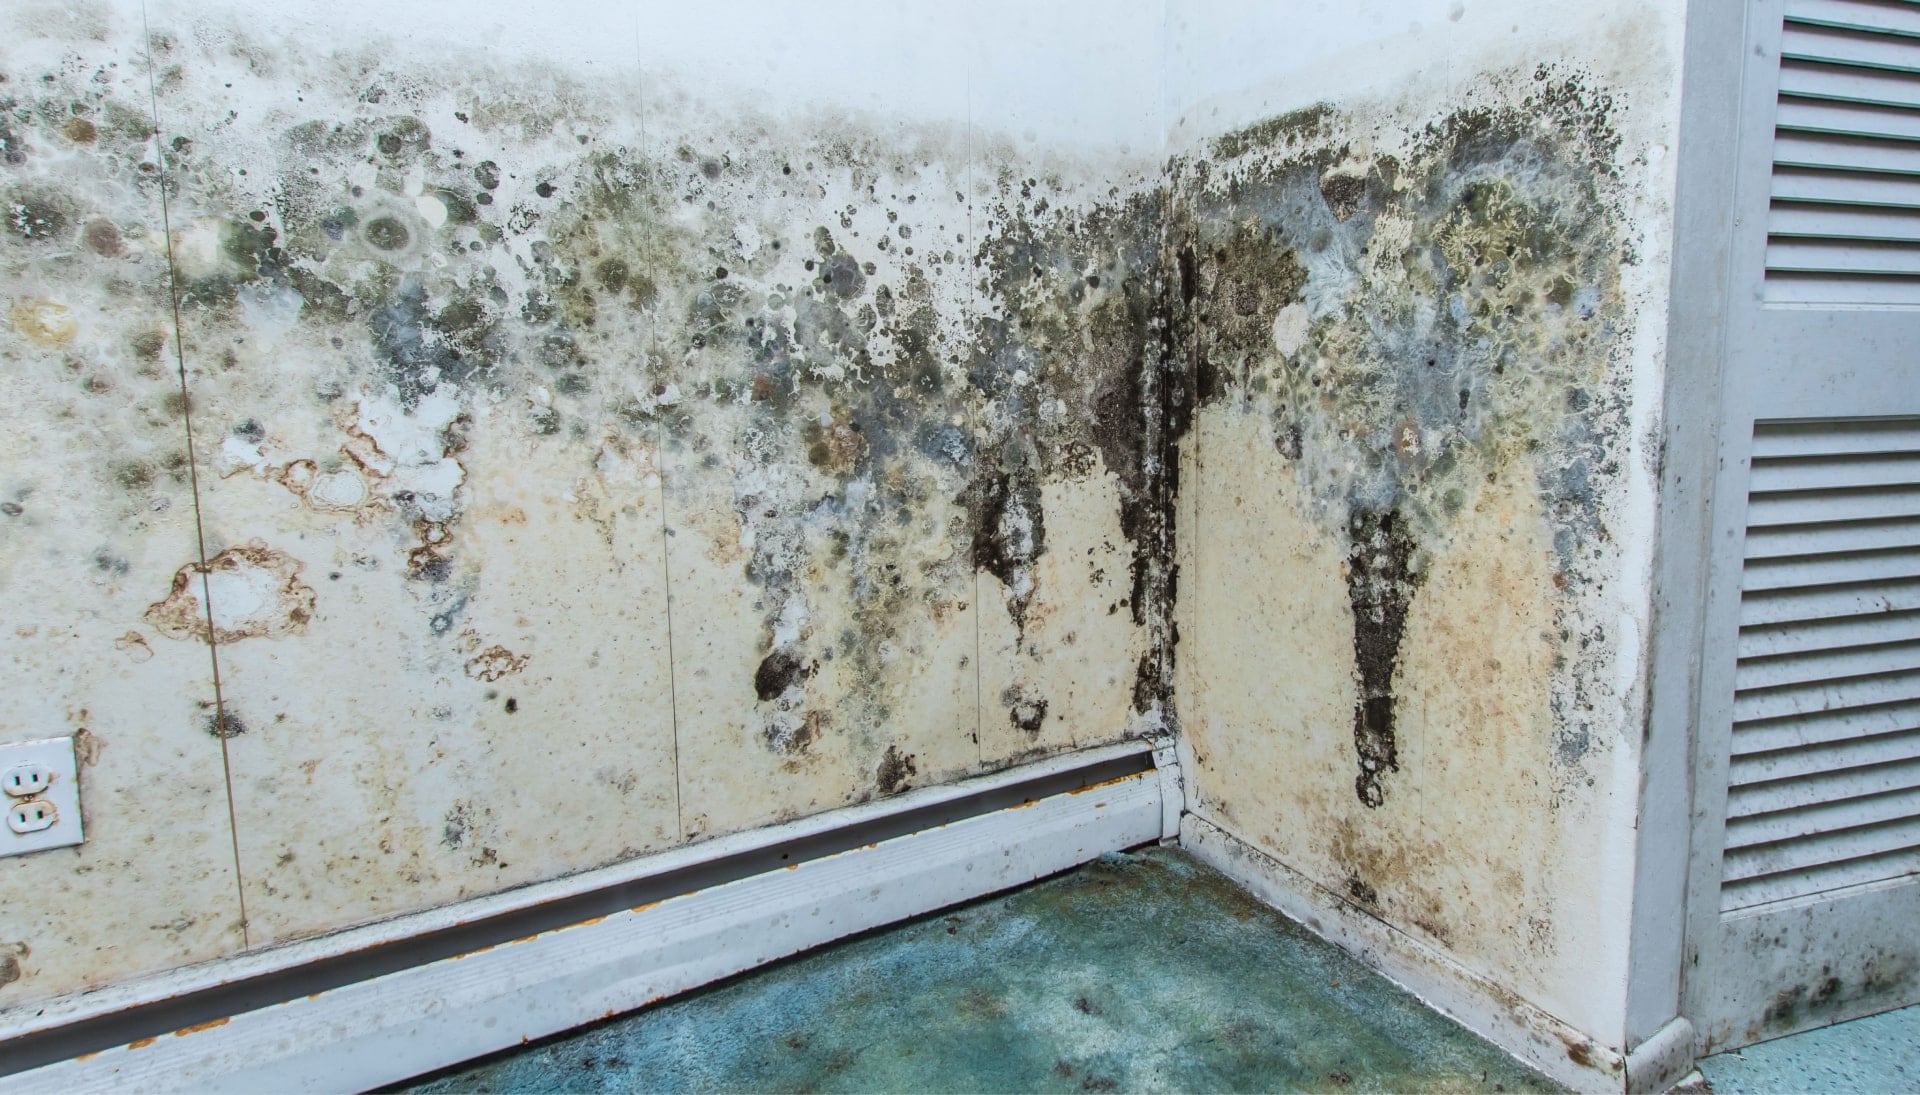 Professional mold removal, odor control, and water damage restoration service in Des Moines, Iowa.